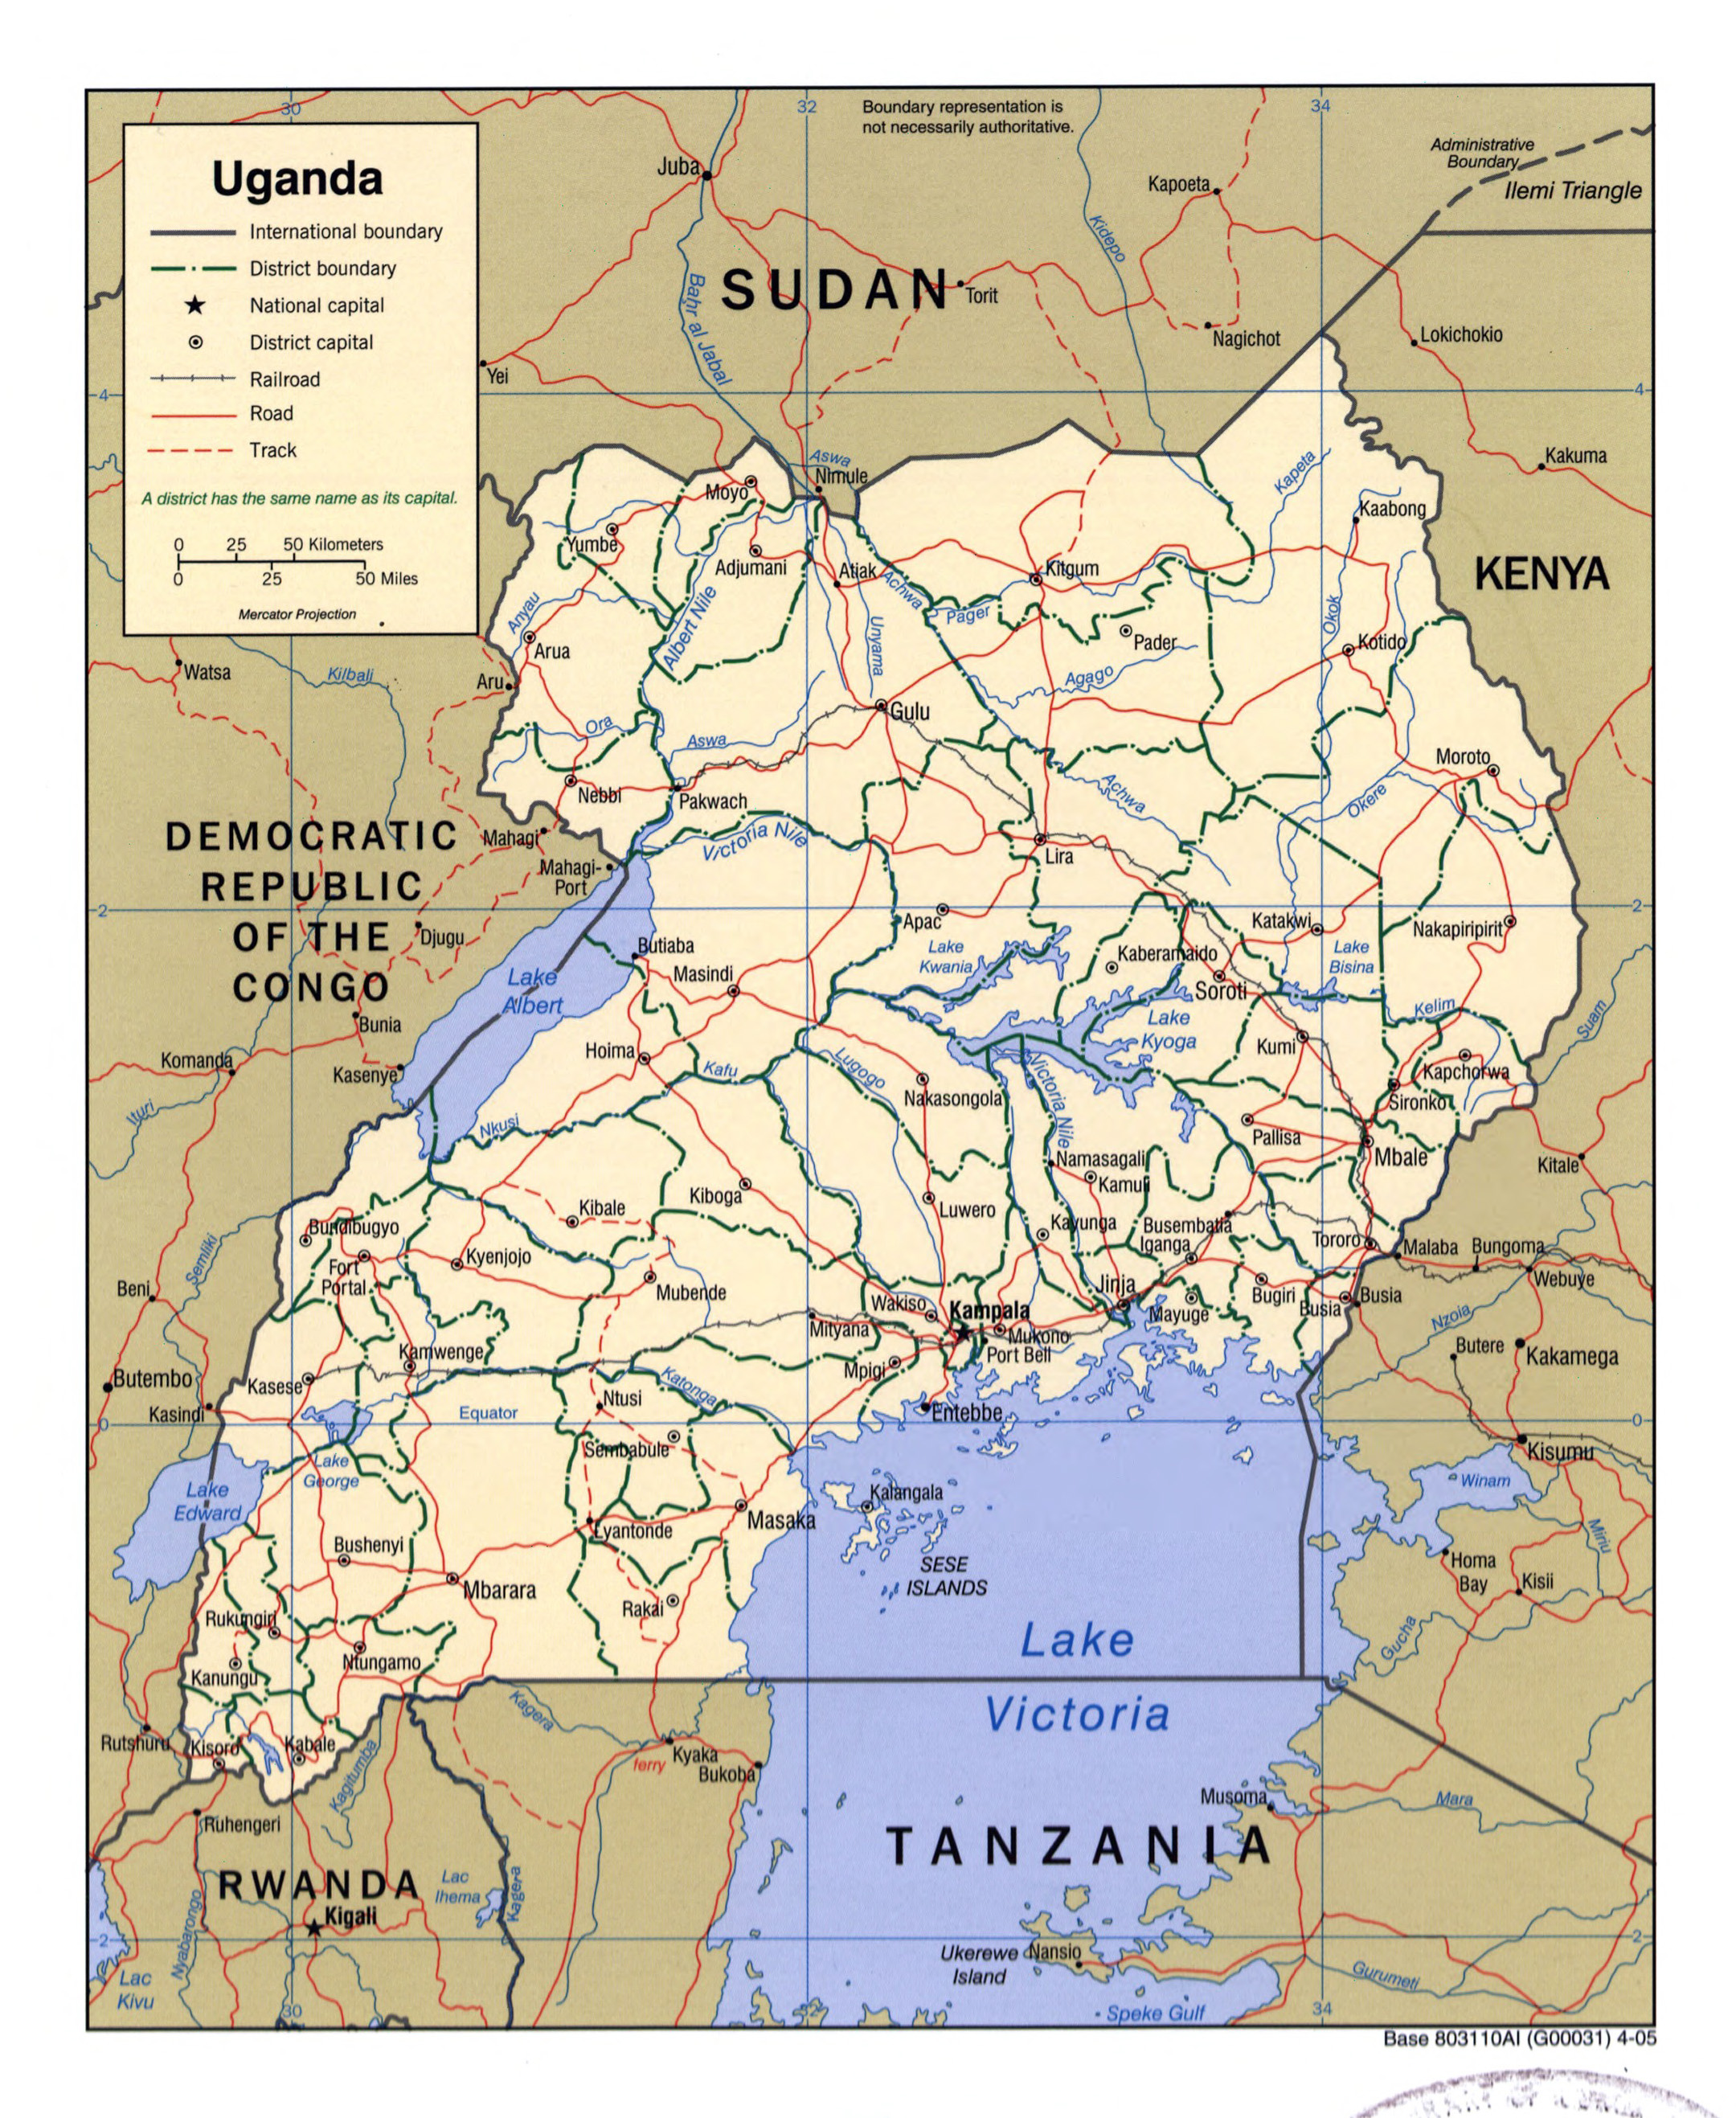 Large Detailed Political And Administrative Map Of Uganda With Roads Railroads And Major Cities 2005 